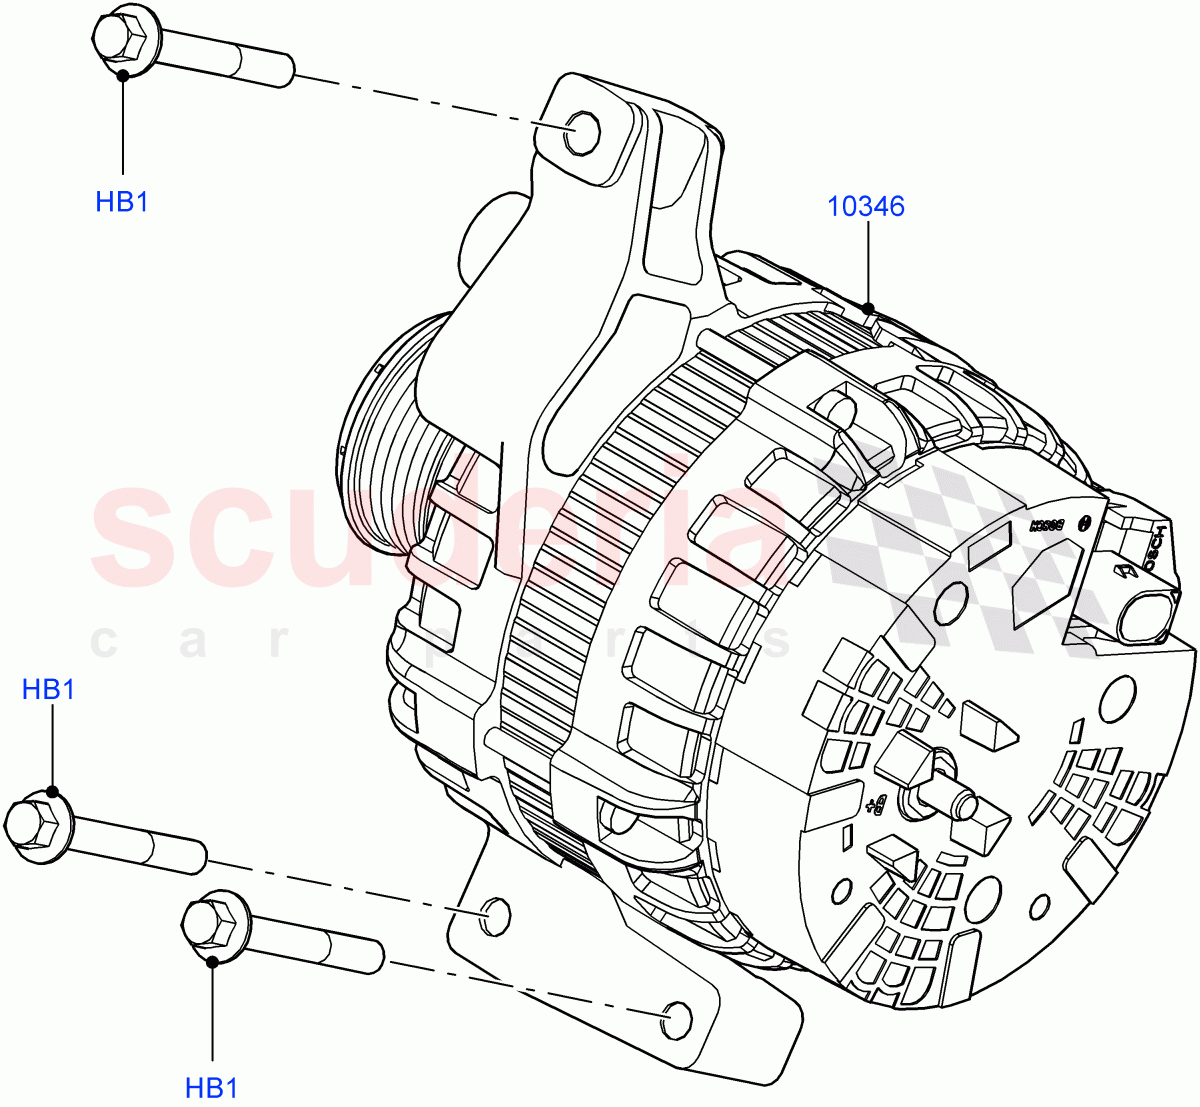 Alternator And Mountings(2.0L 16V TIVCT T/C 240PS Petrol,Changsu (China),2.0L 16V TIVCT T/C Gen2 Petrol)((V)FROMFG000001) of Land Rover Land Rover Discovery Sport (2015+) [2.0 Turbo Petrol GTDI]